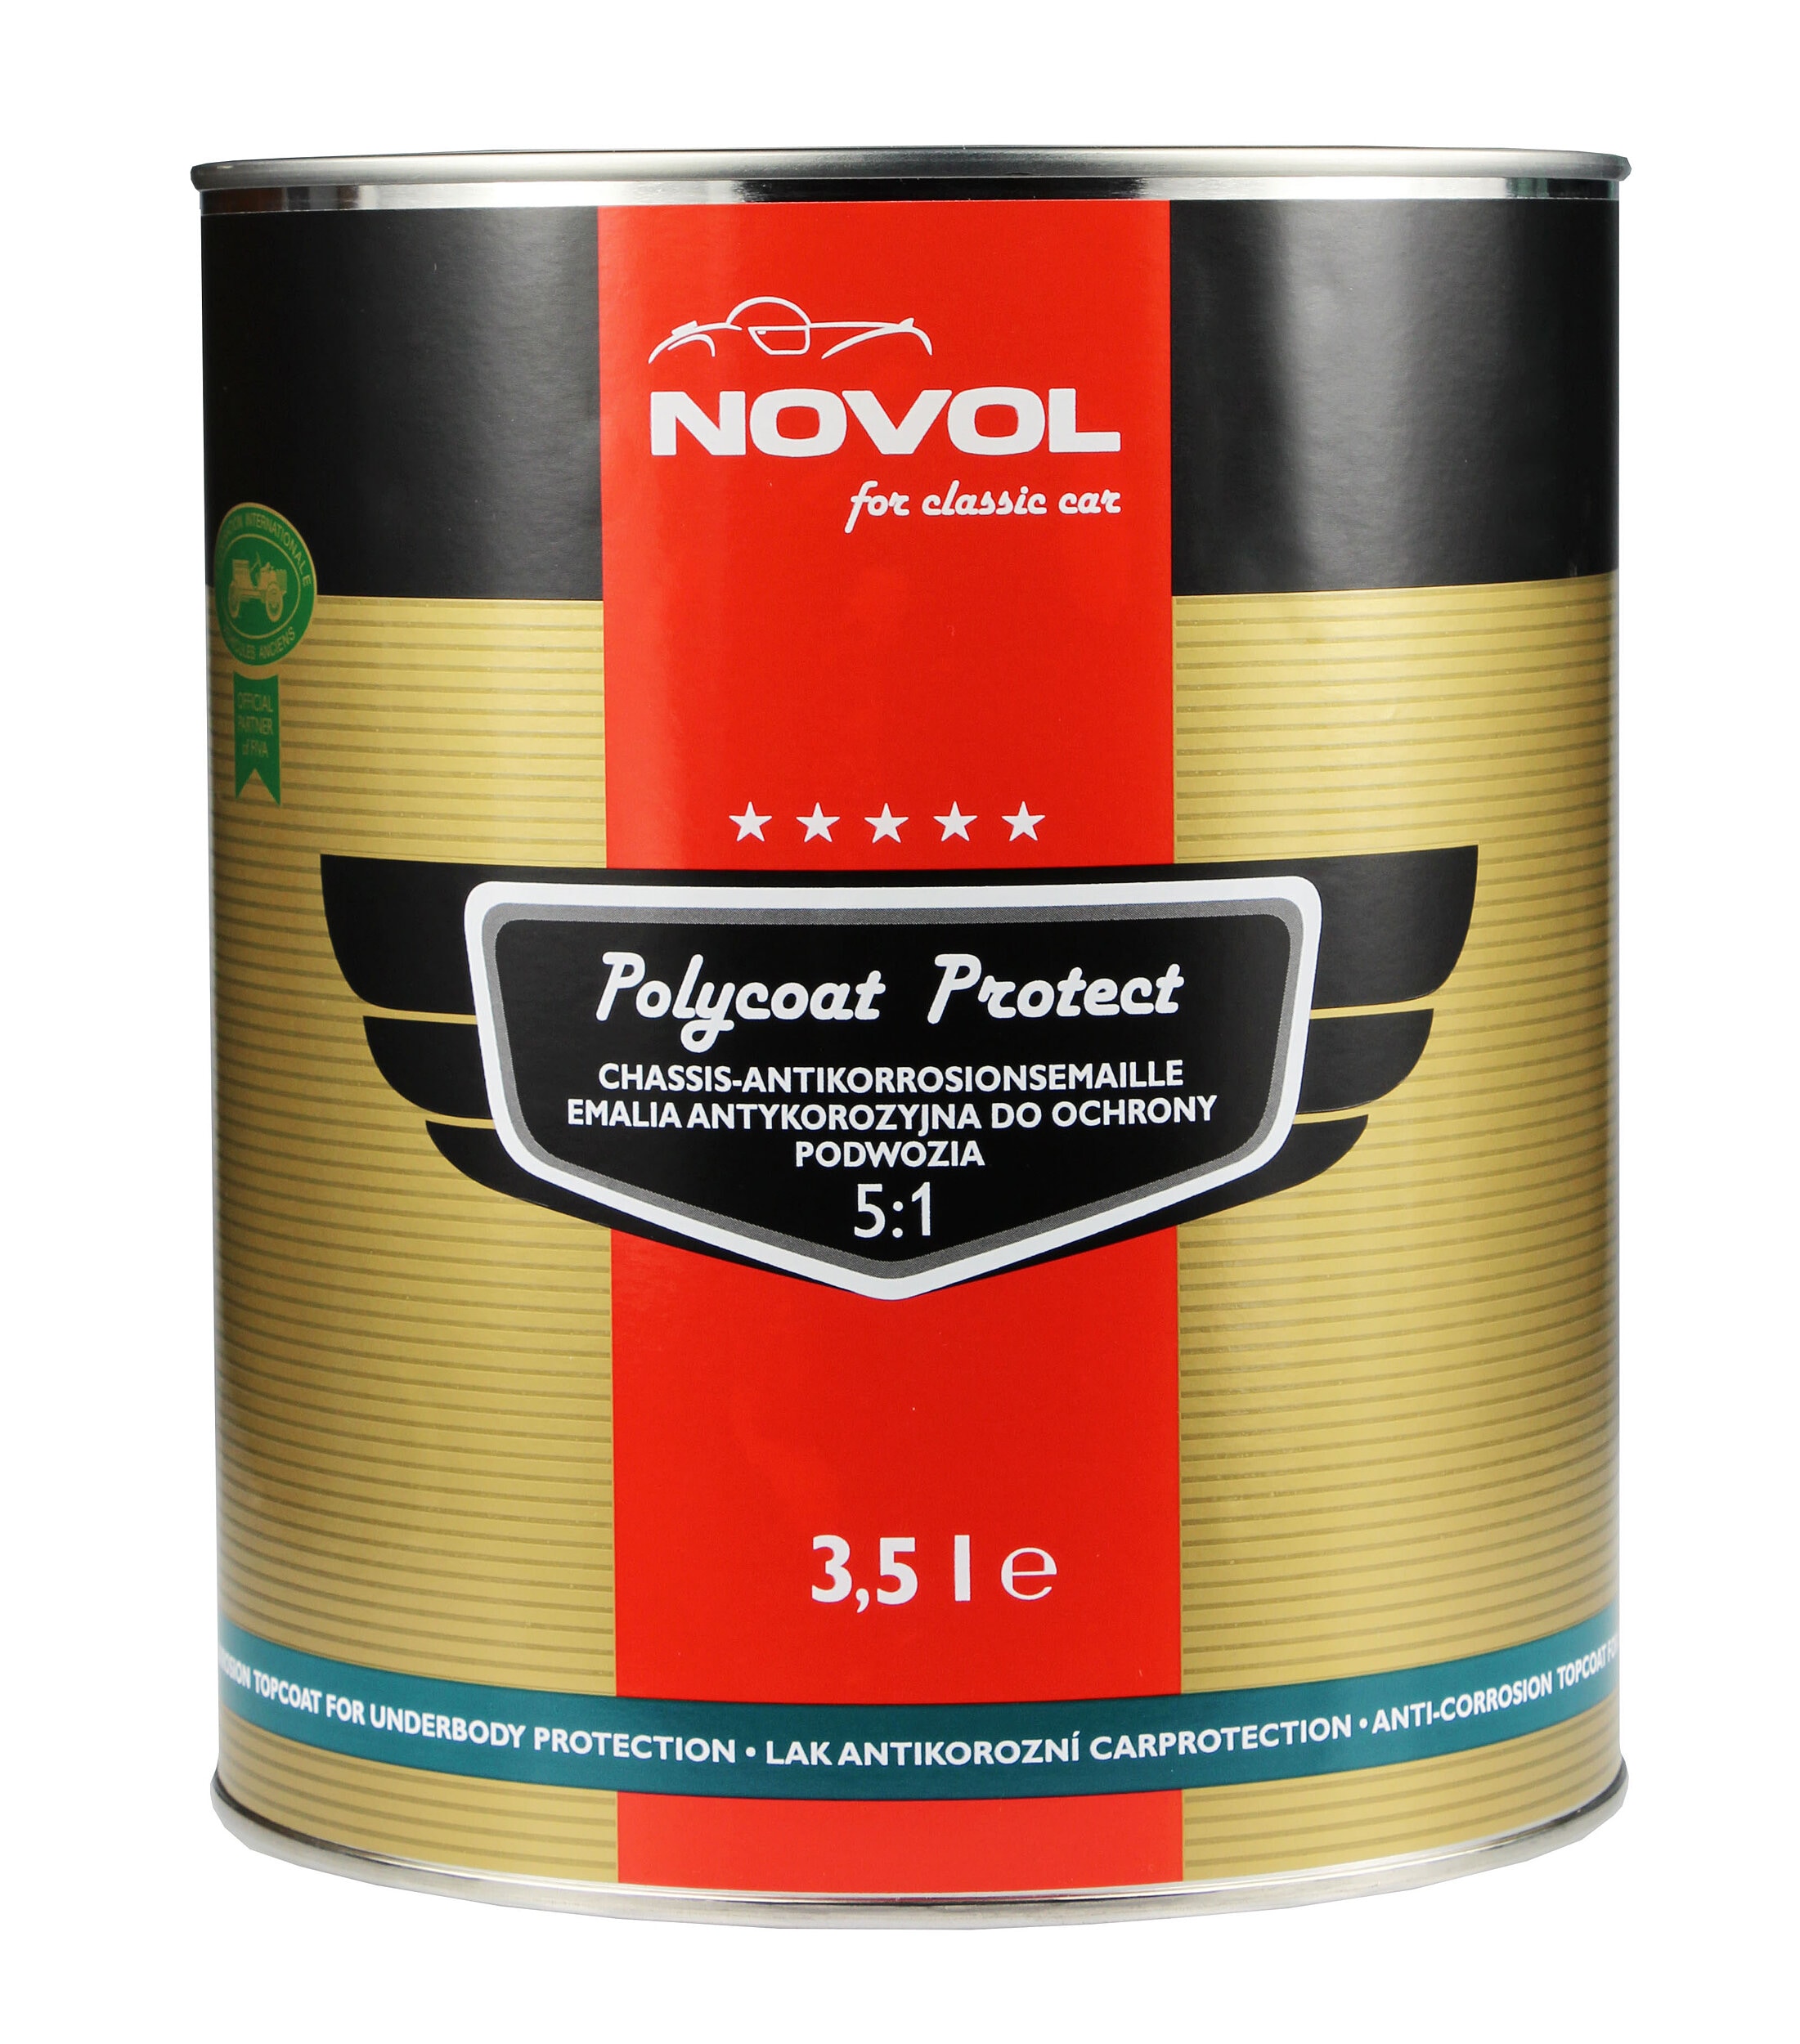 Polycoat Protect, 3,5 l